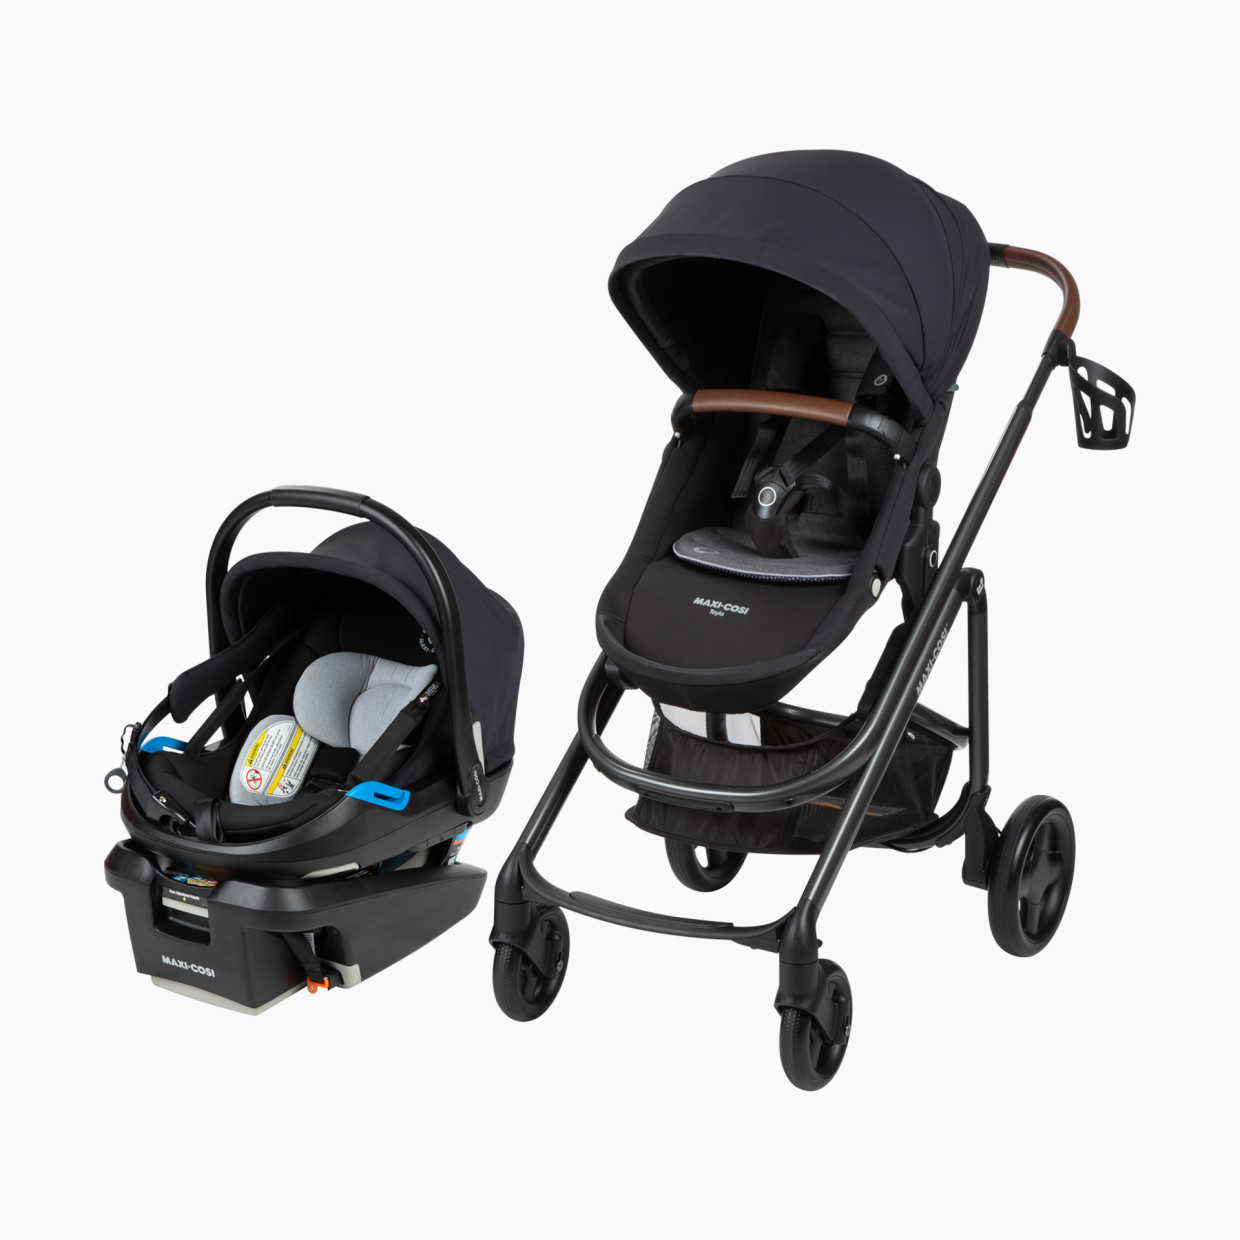 Maxi-Cosi Tayla XP Travel System with Coral XP - Essential Black.